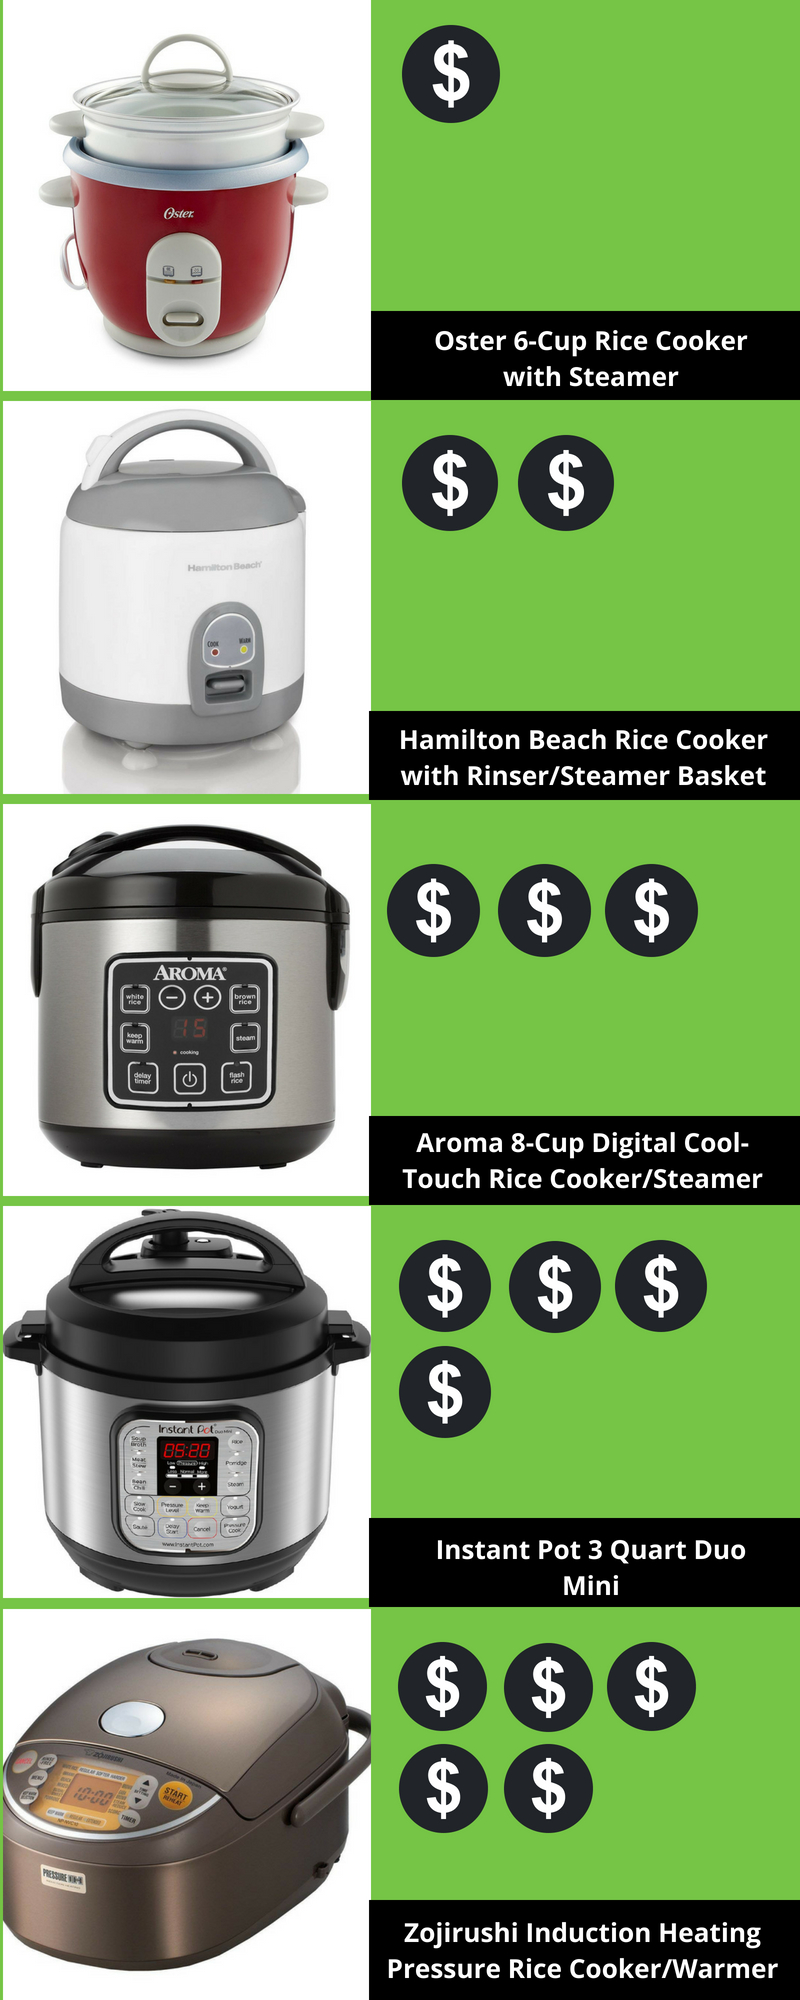 How Much Should You Pay for a Rice Cooker - WITH TEXT